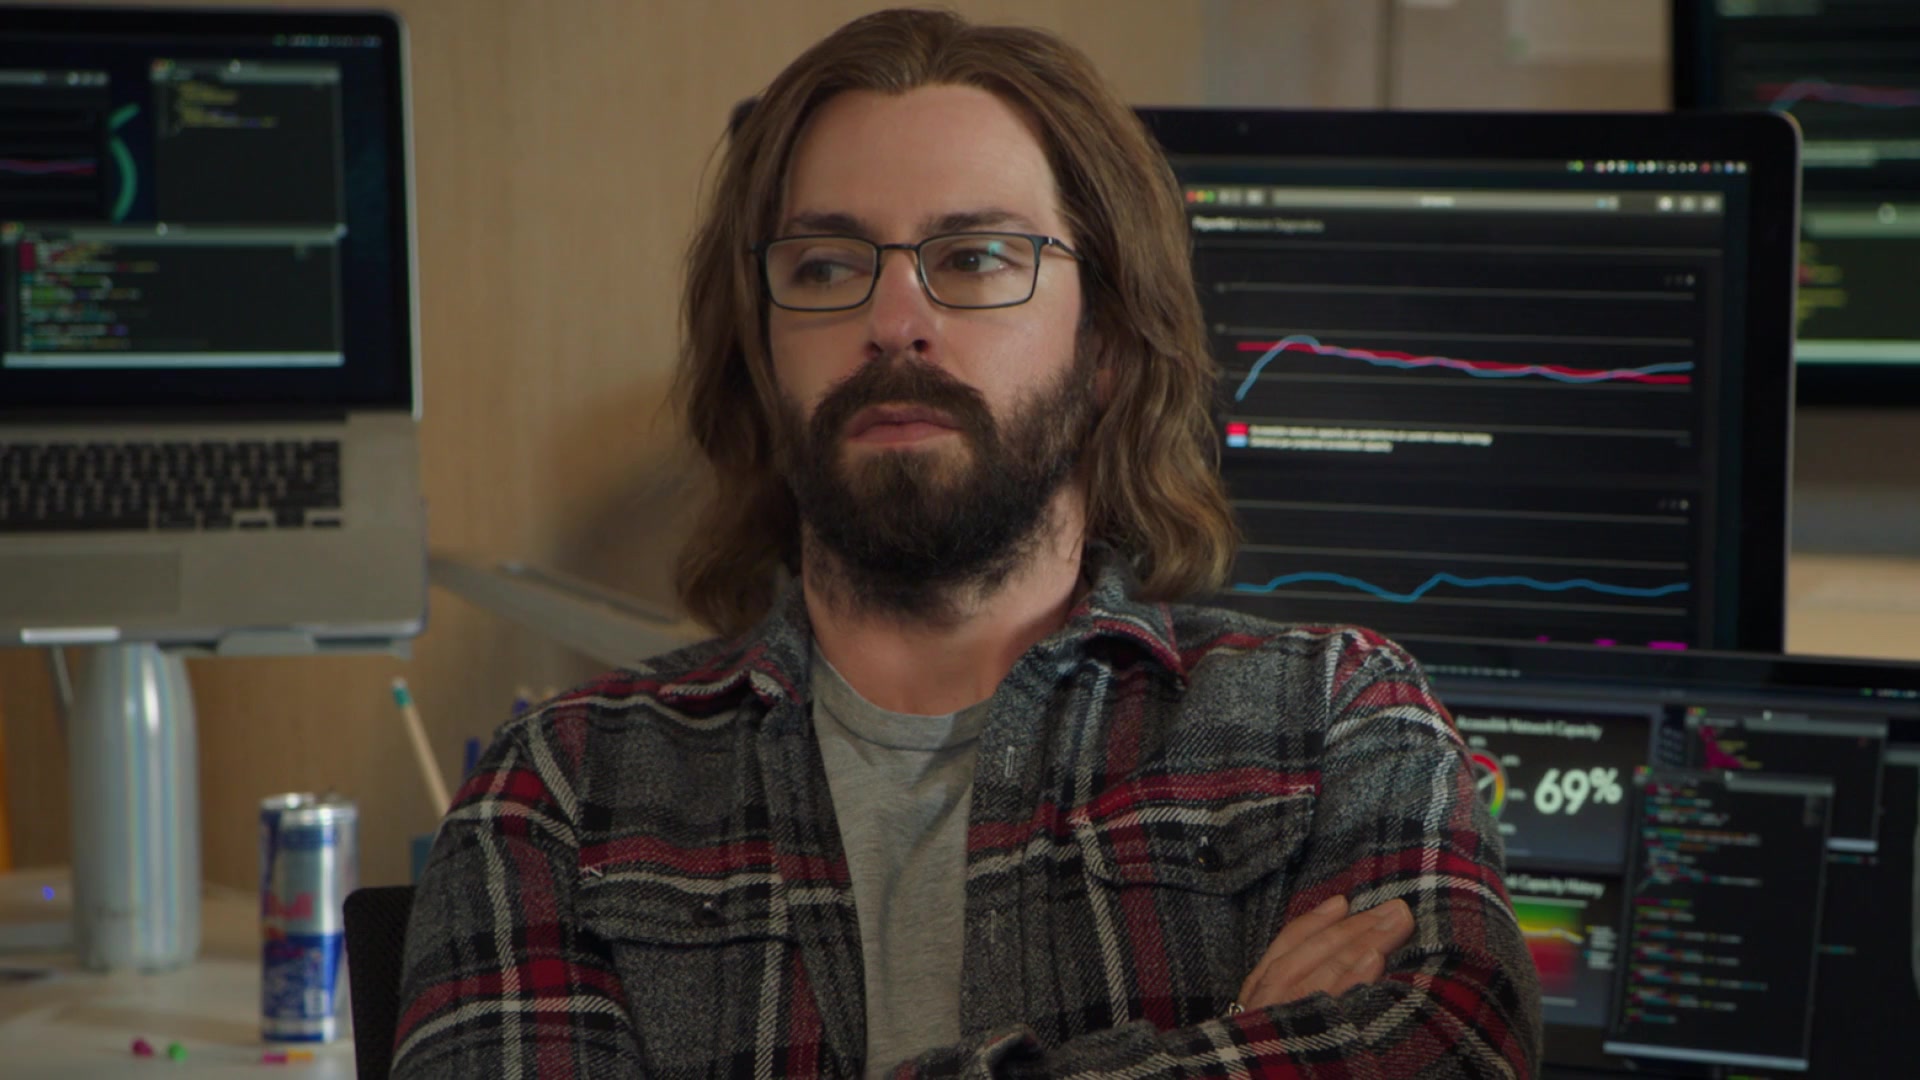 Red Bull Energy Drink Enjoyed By Martin Starr As Bertram Gilfoyle In Silicon Valley Season 6 Episode 6 RussFest (2019)